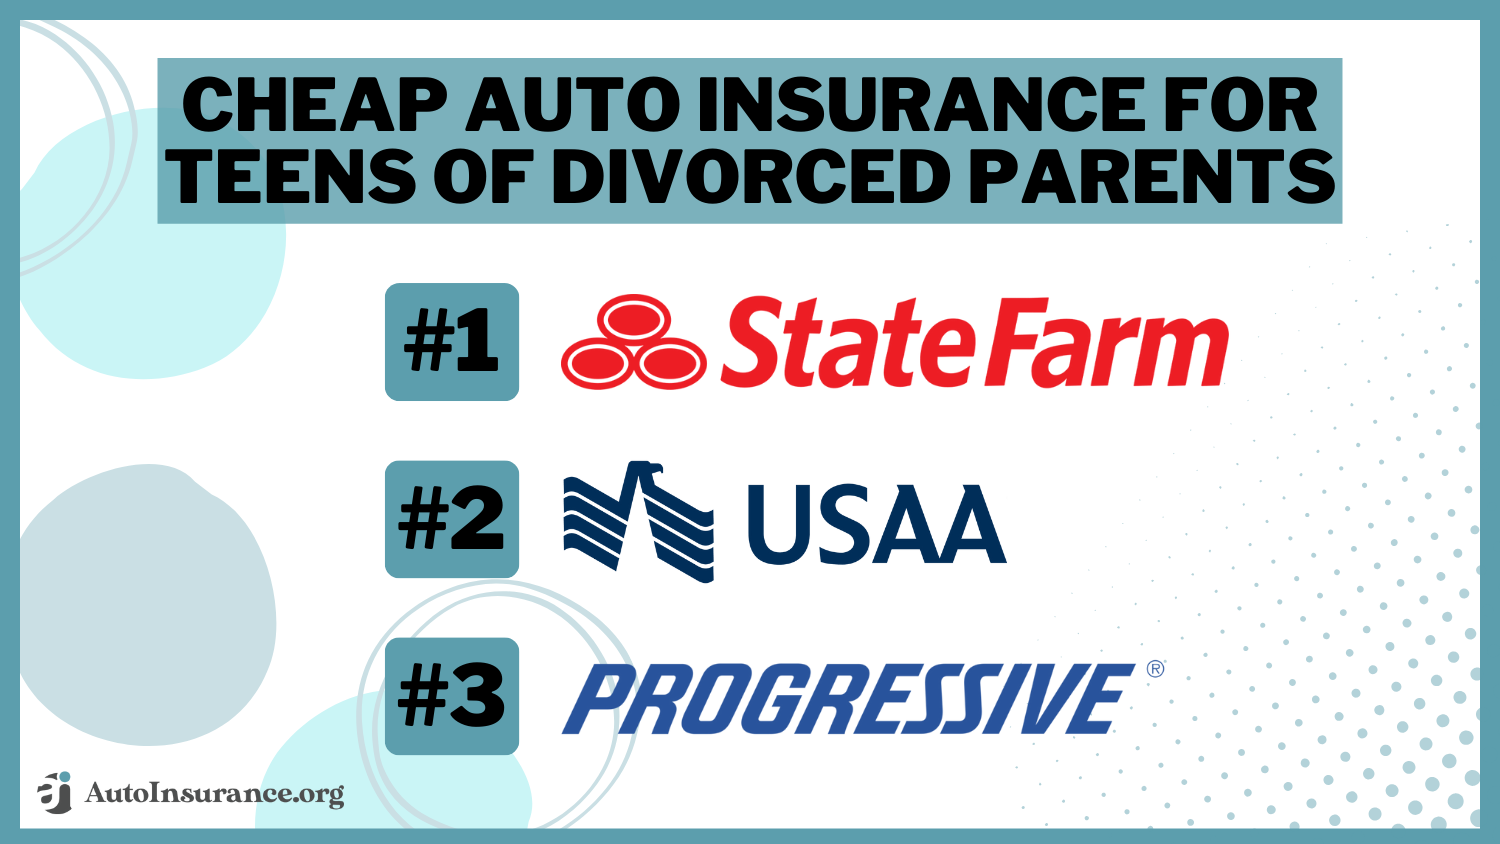 Cheap Auto Insurance for Teens of Divorced Parents